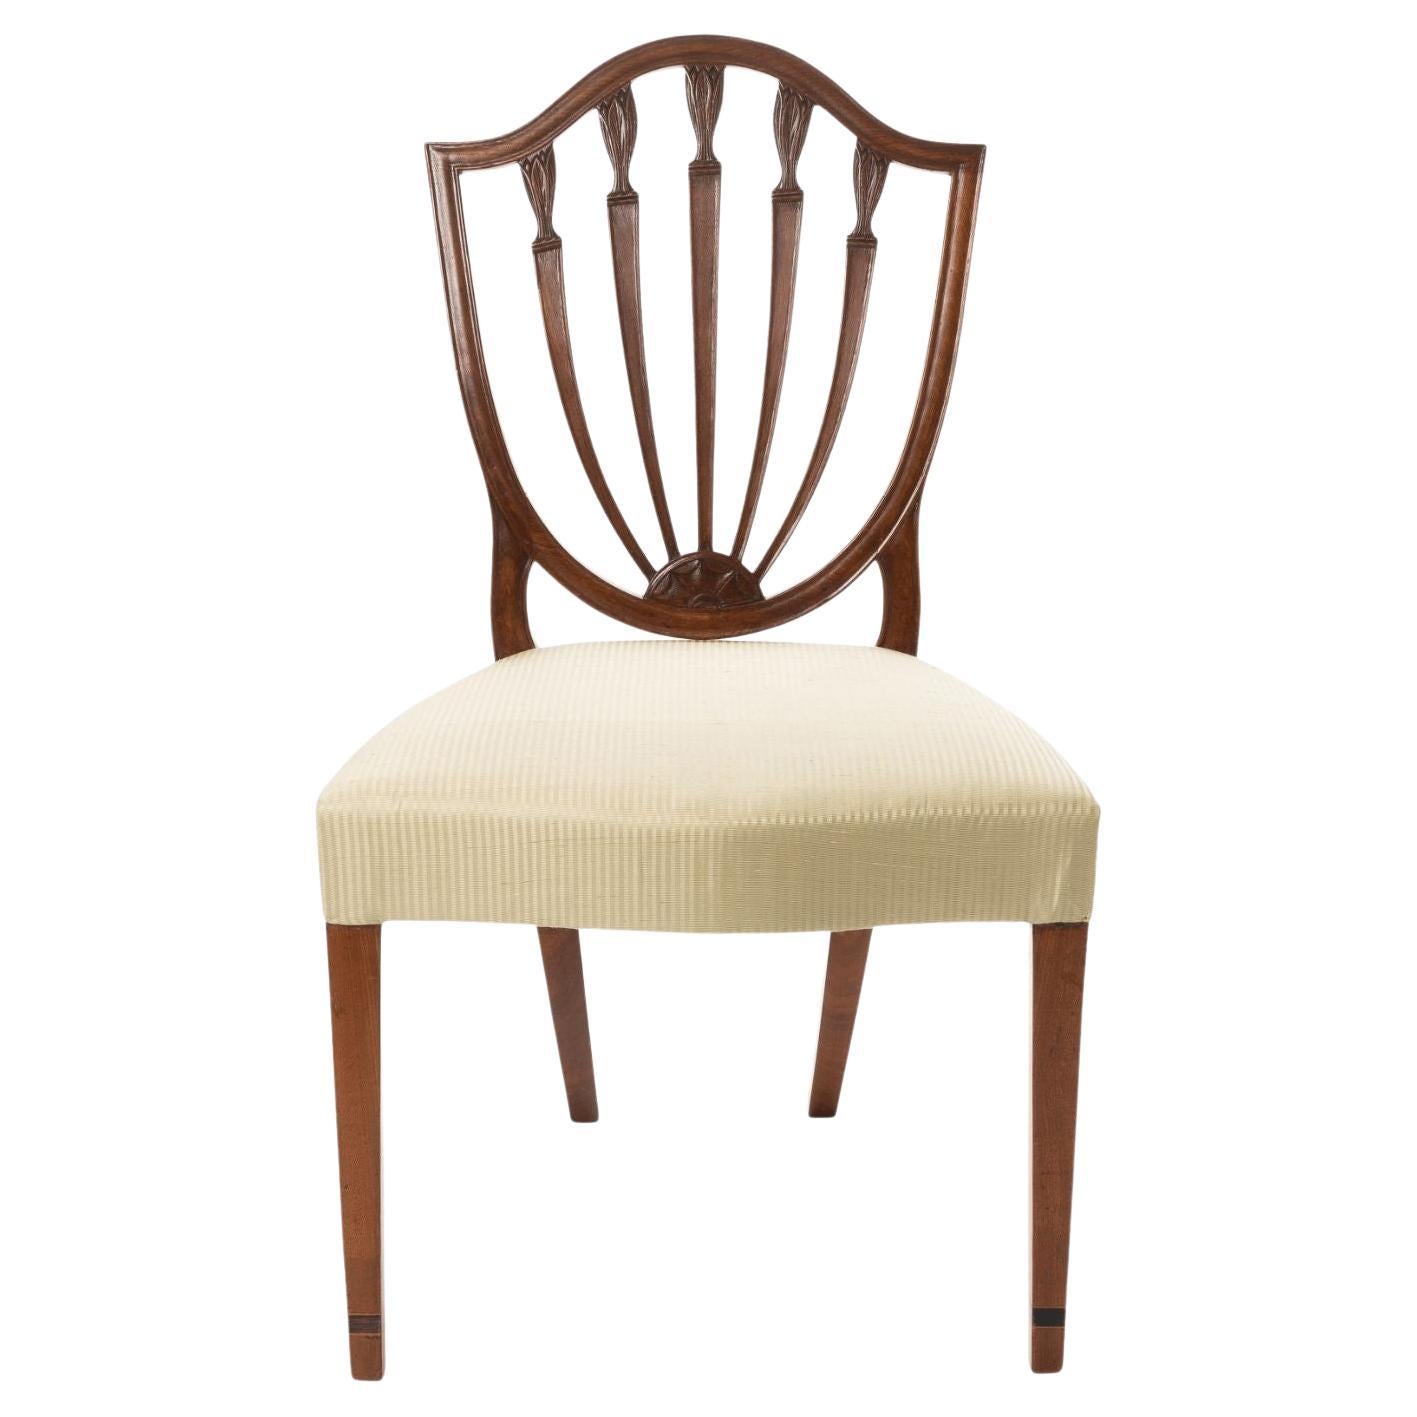 American Mahogany Shield Back Side Chair with Serpentine Seat, c. 1790 For Sale